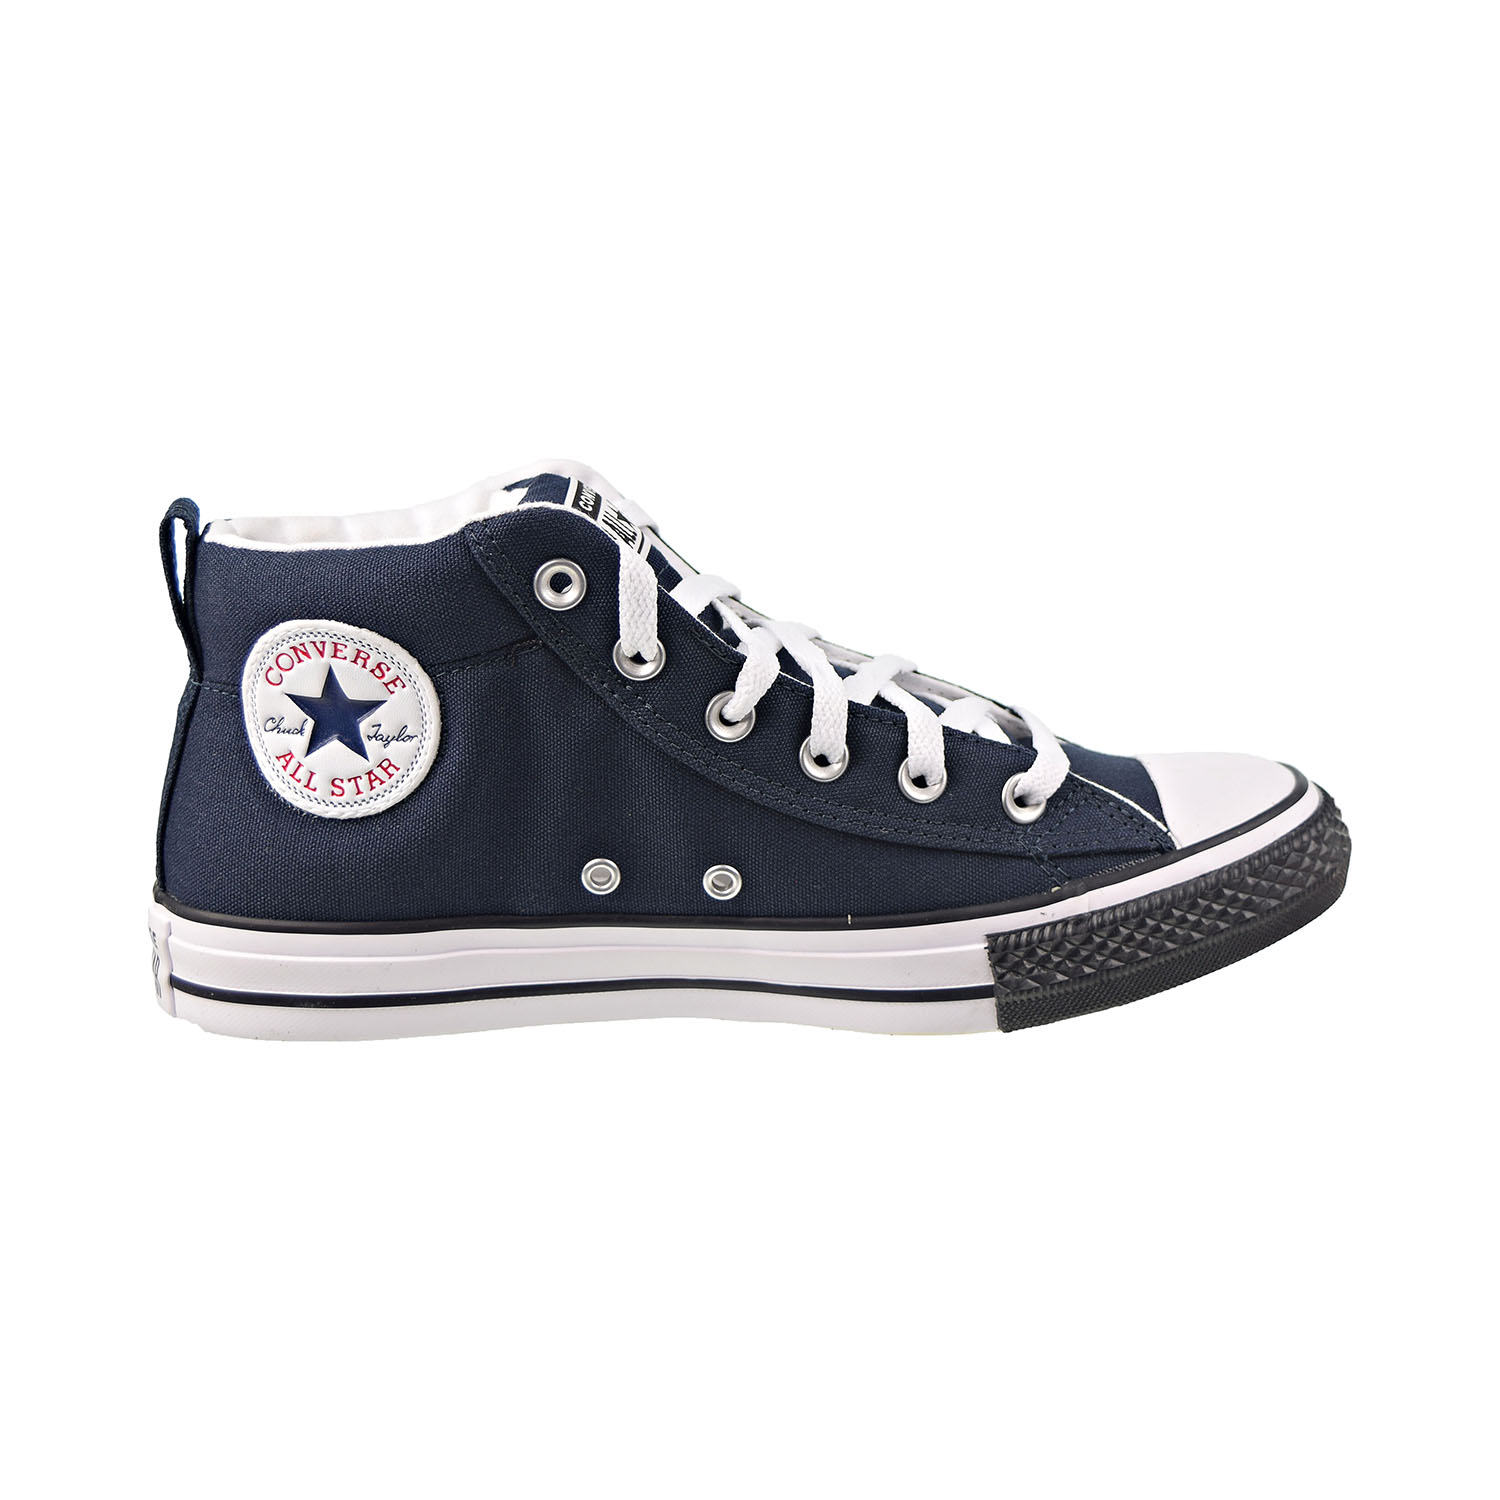 Converse Chuck Taylor All Star Street Mid Men's Shoes Dark Obsidian-White-Black 166337f - image 1 of 6